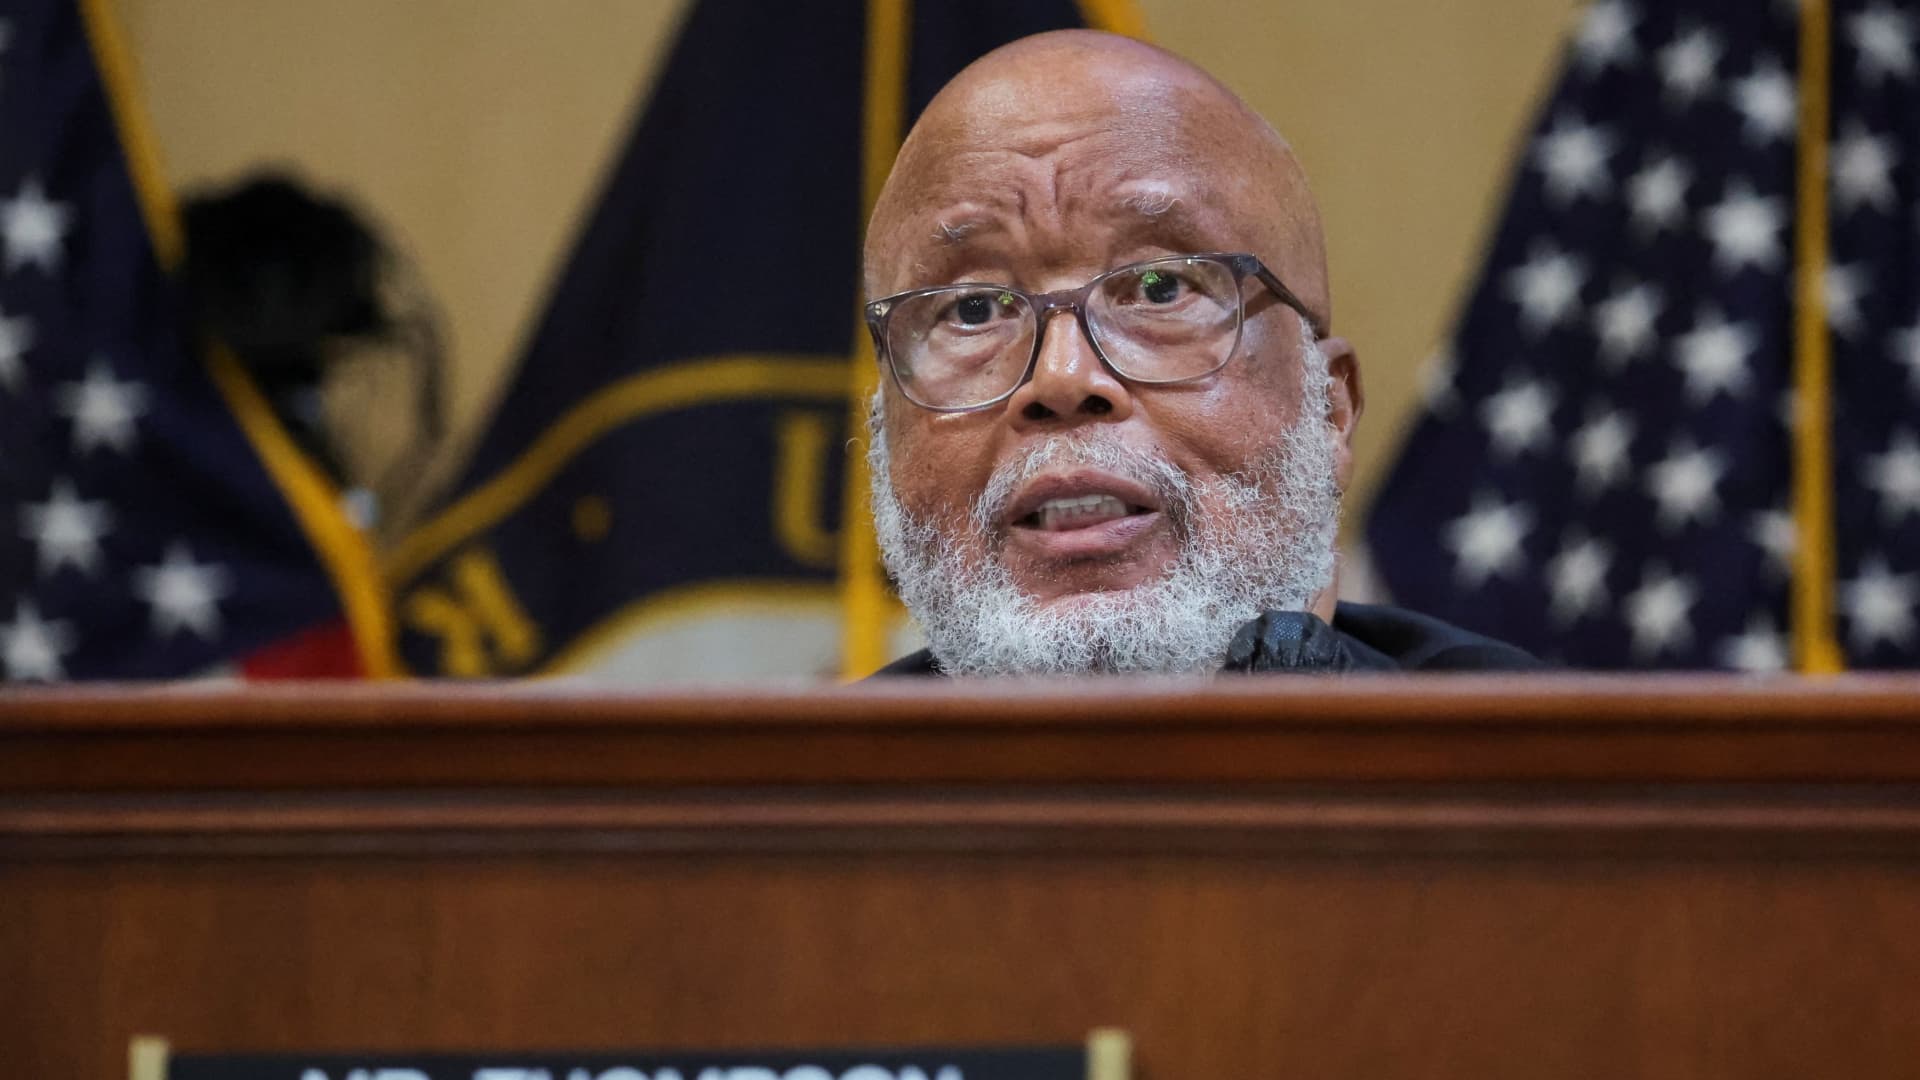 Committee Chairperson U.S. Representative Bennie Thompson (D-MS) speaks during fifth public hearing of the U.S. House Select Committee to Investigate the January 6 Attack on the United States Capitol, on Capitol Hill in Washington, U.S., June 23, 2022. 